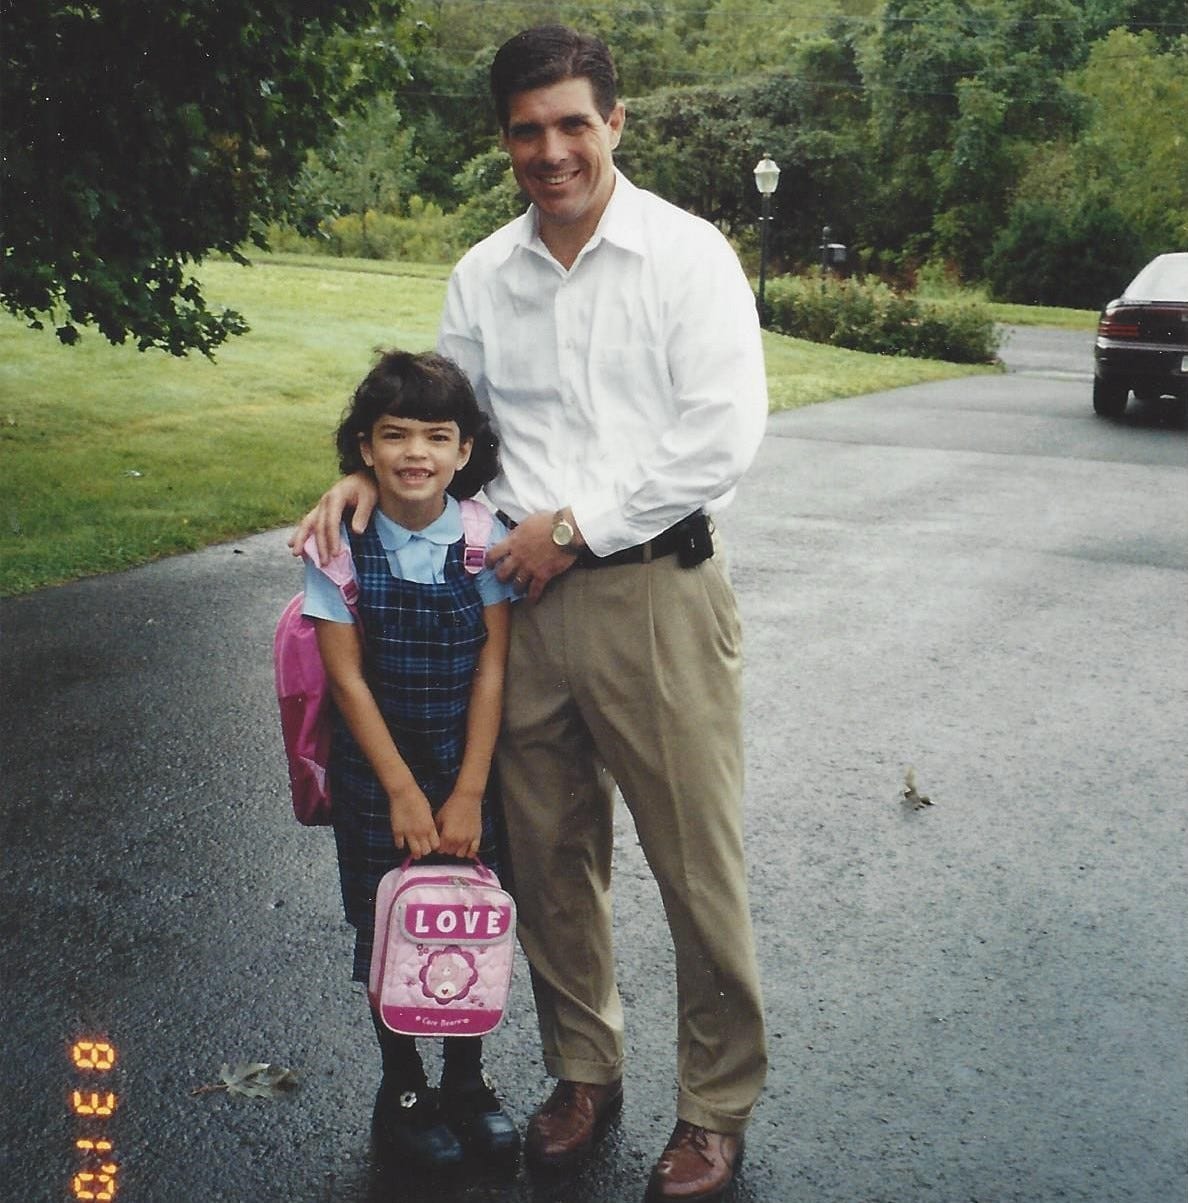 Dad posed alongside his daughter on her first day of first grade. A portion of a purple Dodge Intrepid can be seen in the background